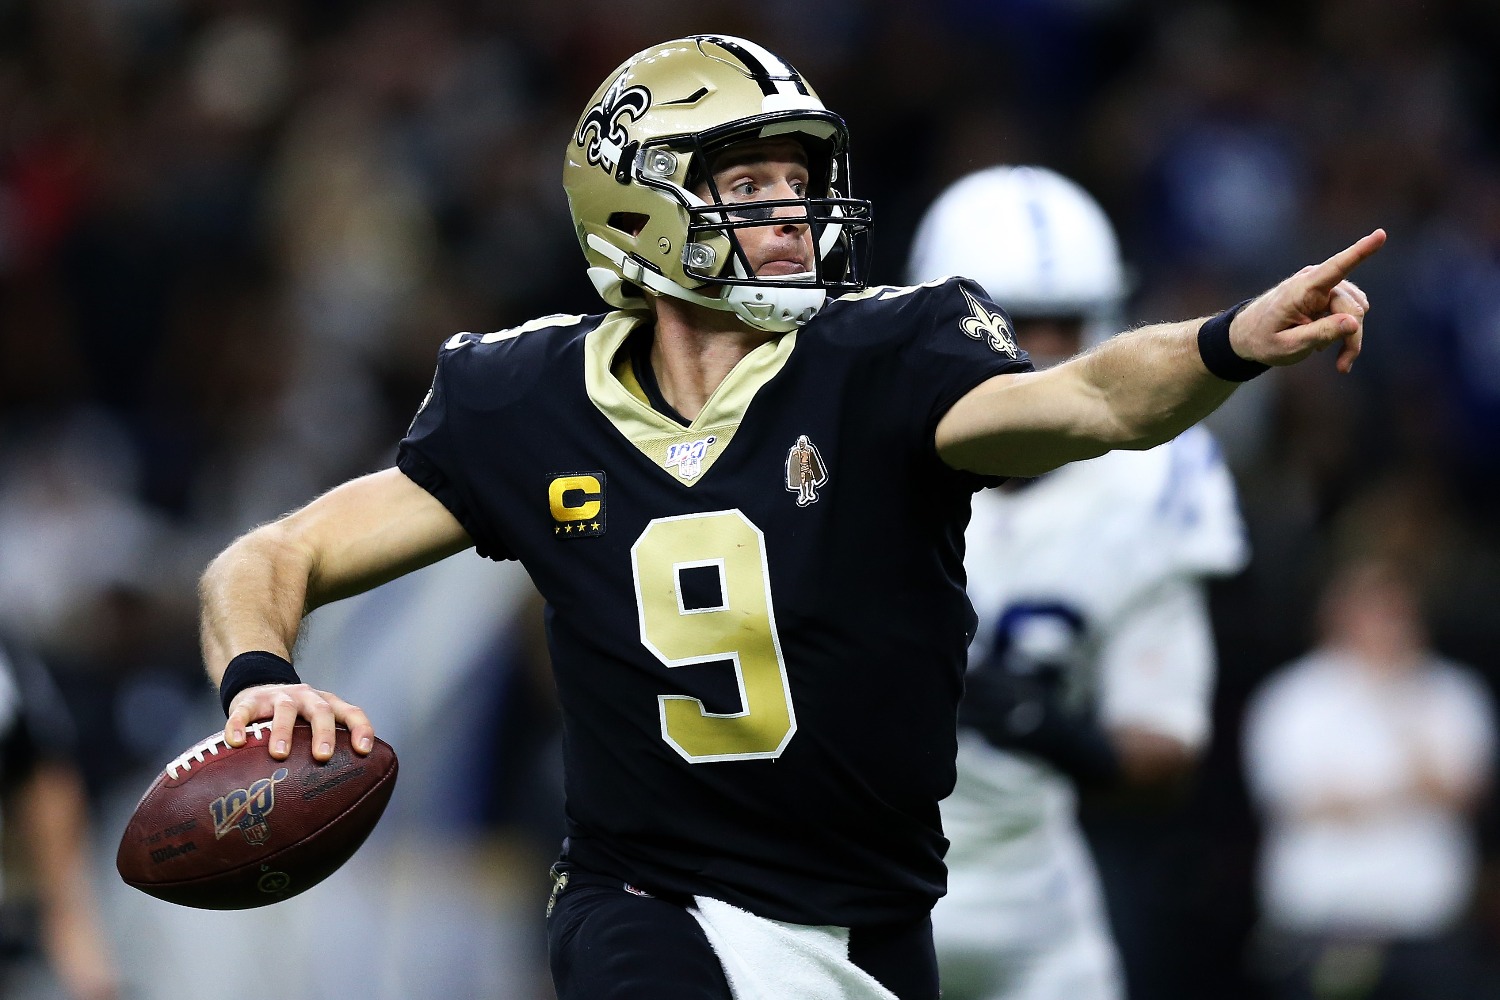 Saints QB Drew Brees just sent a terrifying message to the rest of the NFL as he enters what should be his final season in the league.